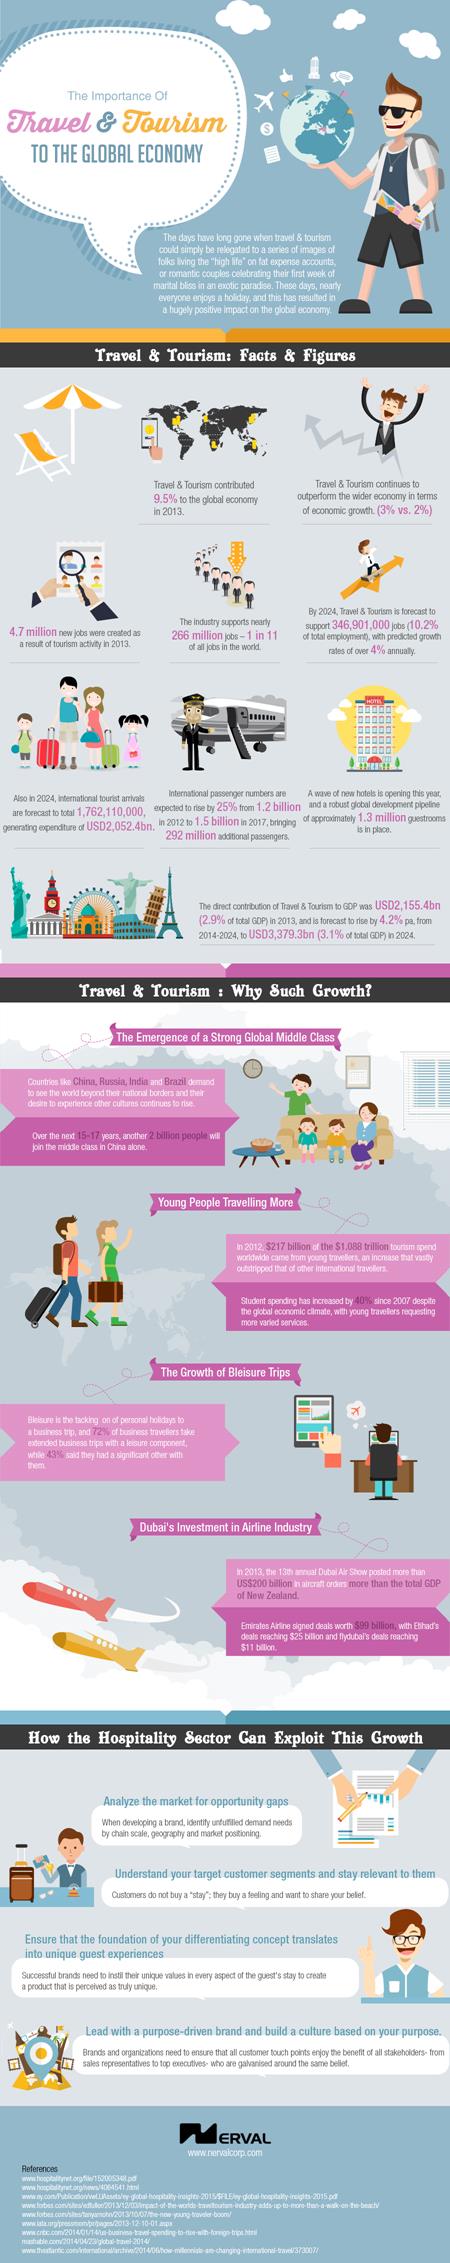 The-Importance-of-Travel-and-Tourism-to-the-Global-Economy